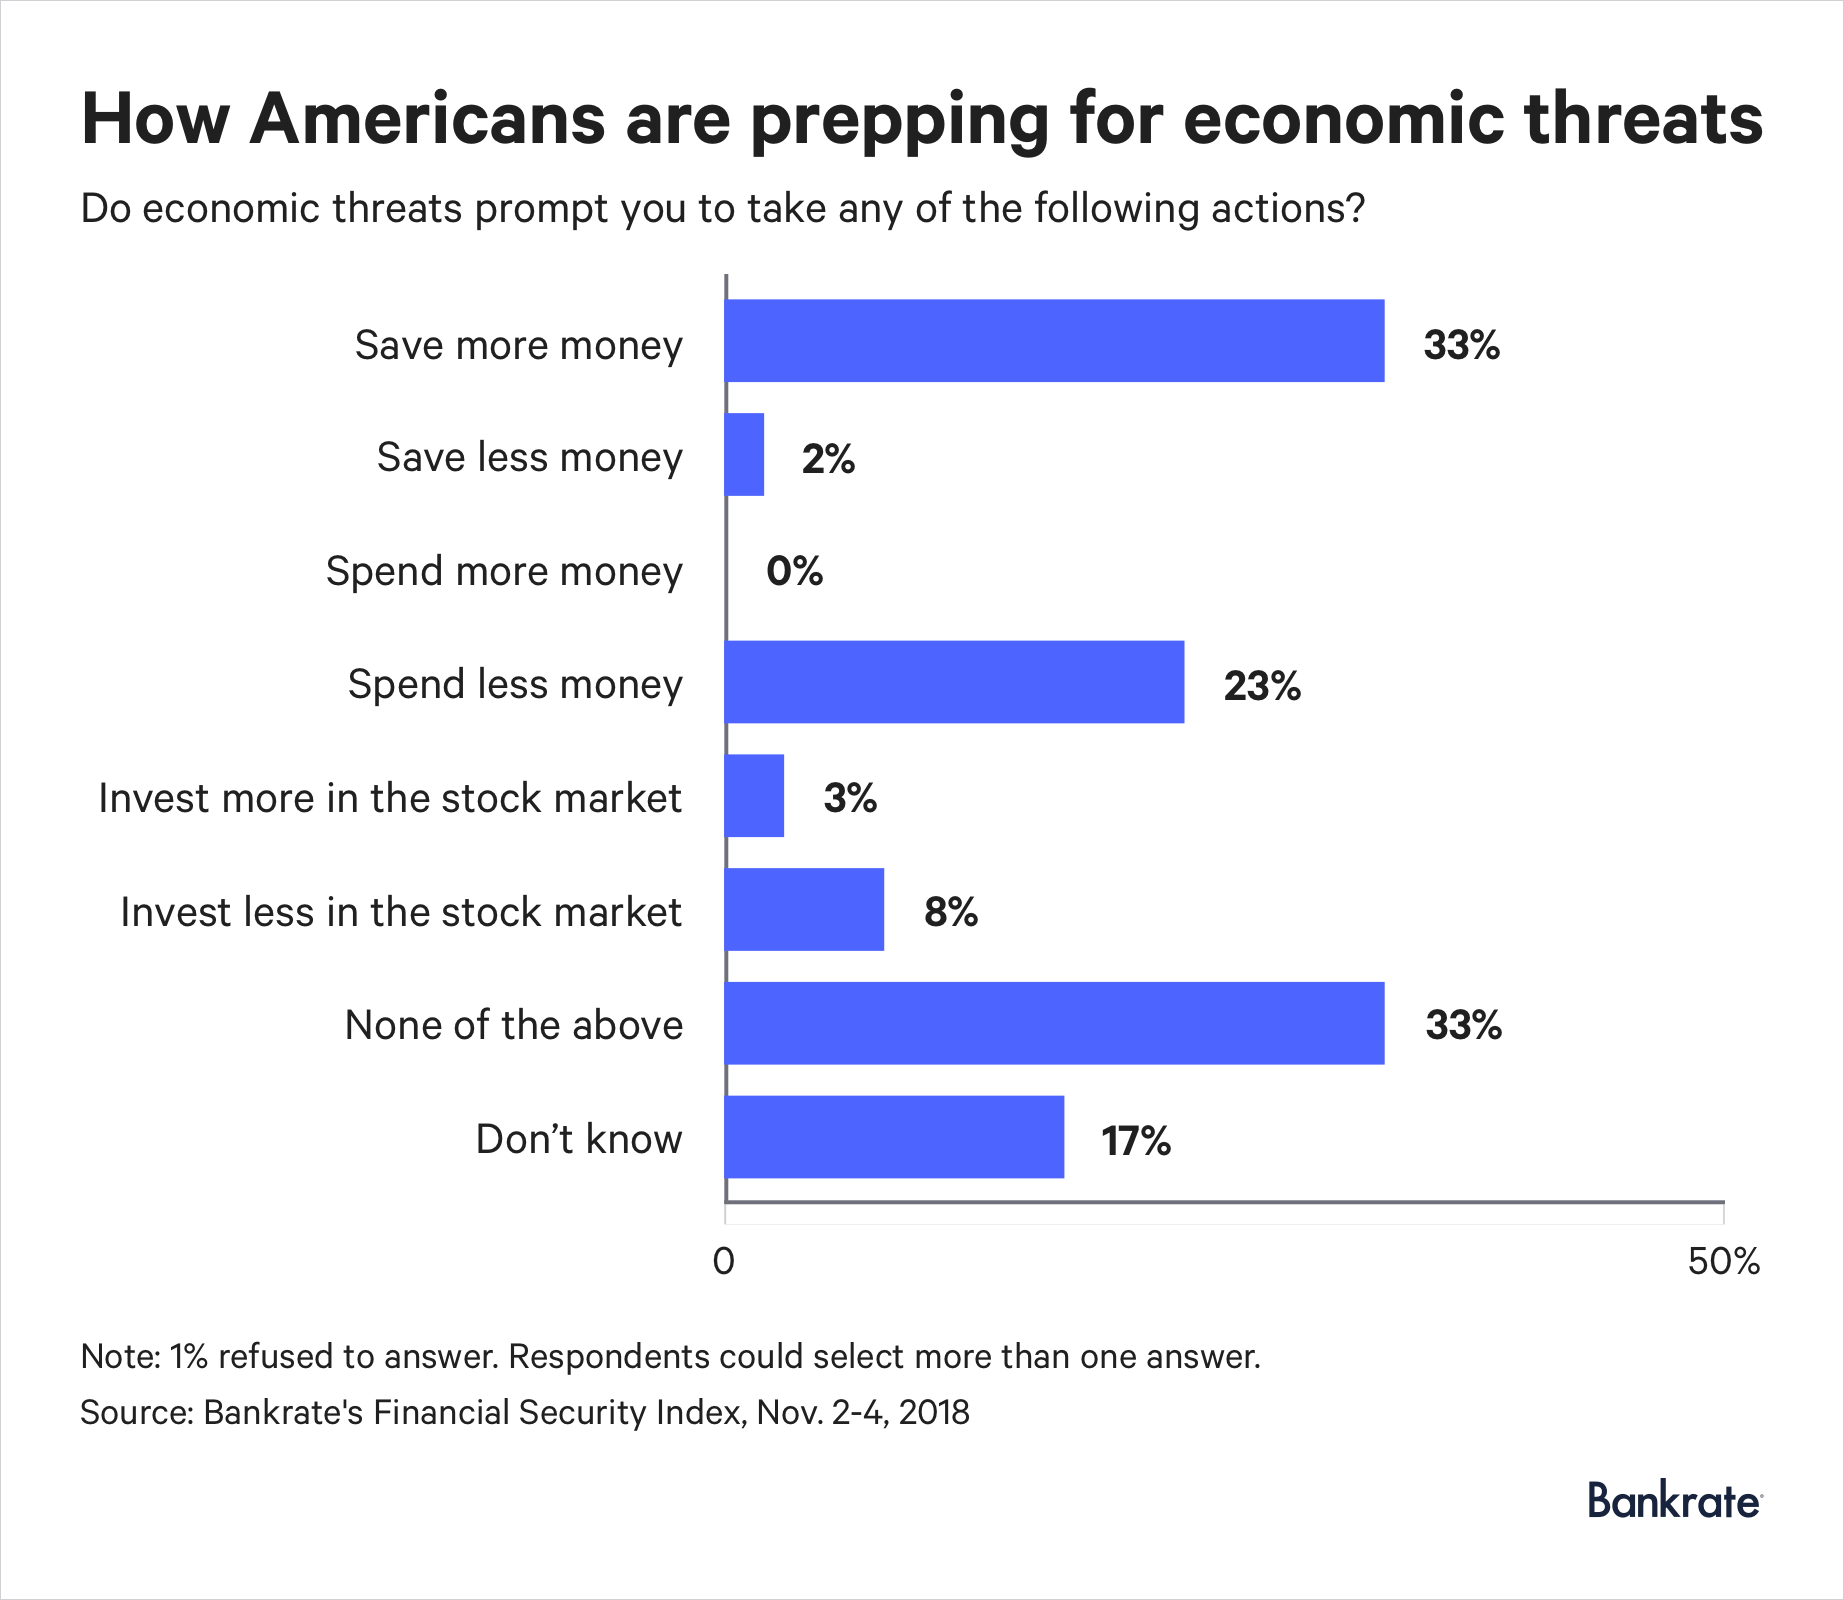 33% of Americans are planning to save more money